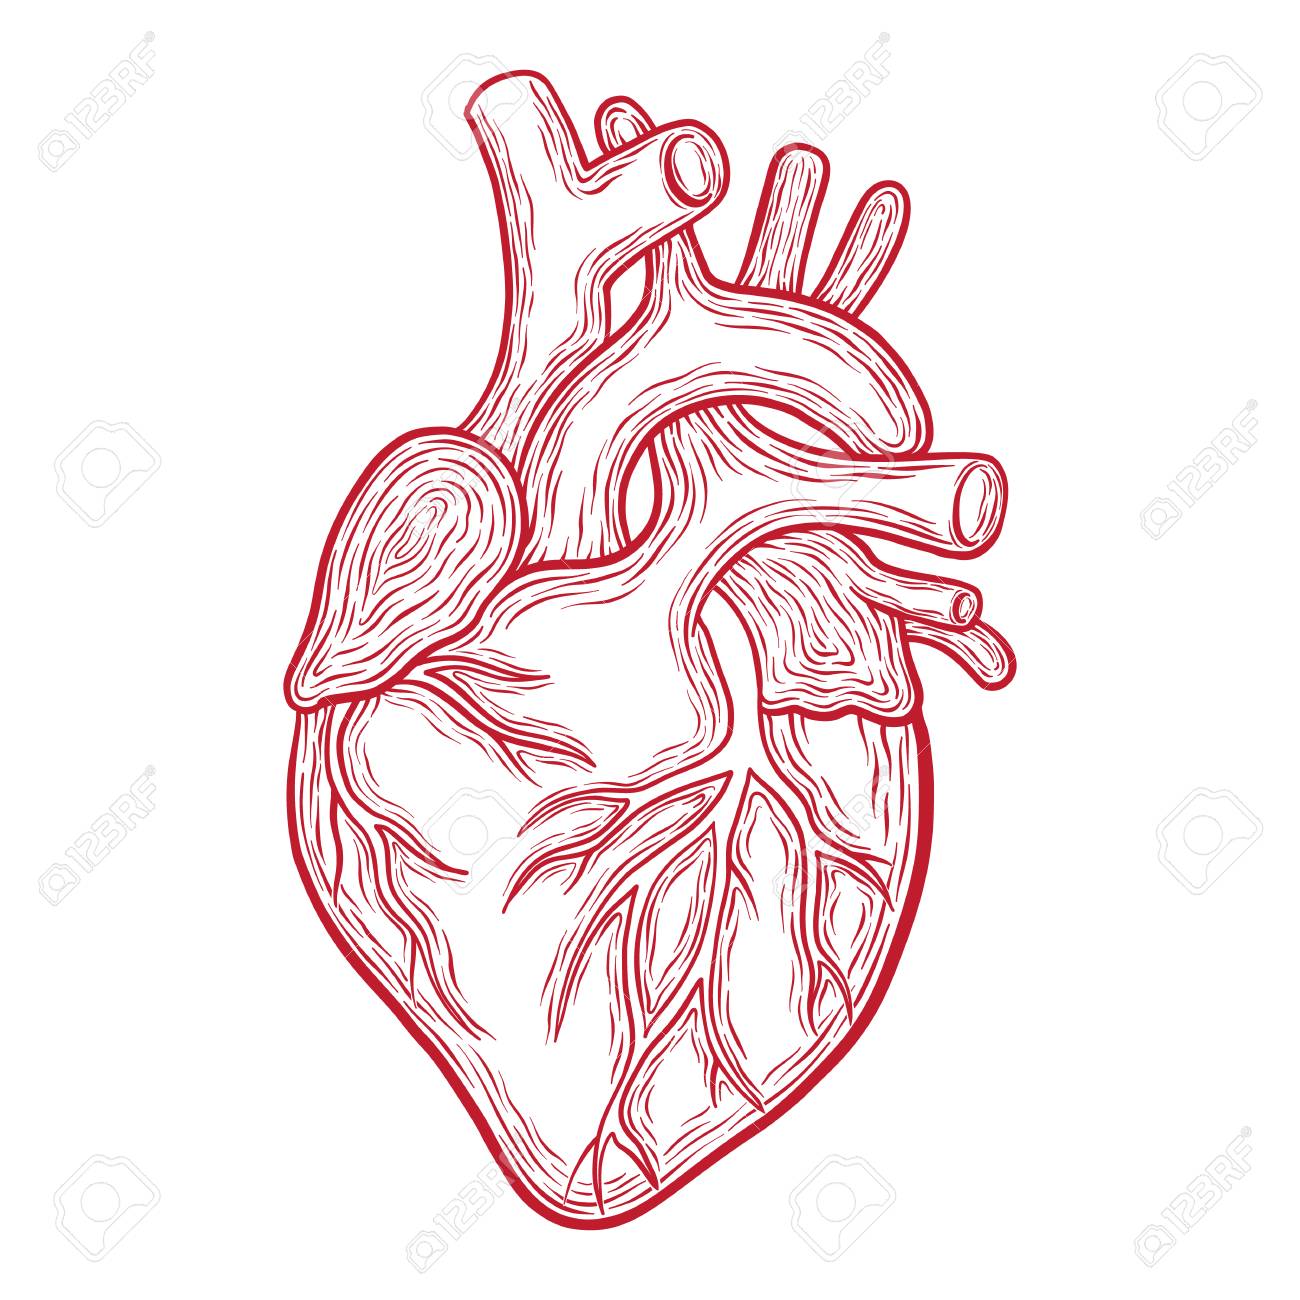 Human Heart Anatomy Drawing | Free download on ClipArtMag